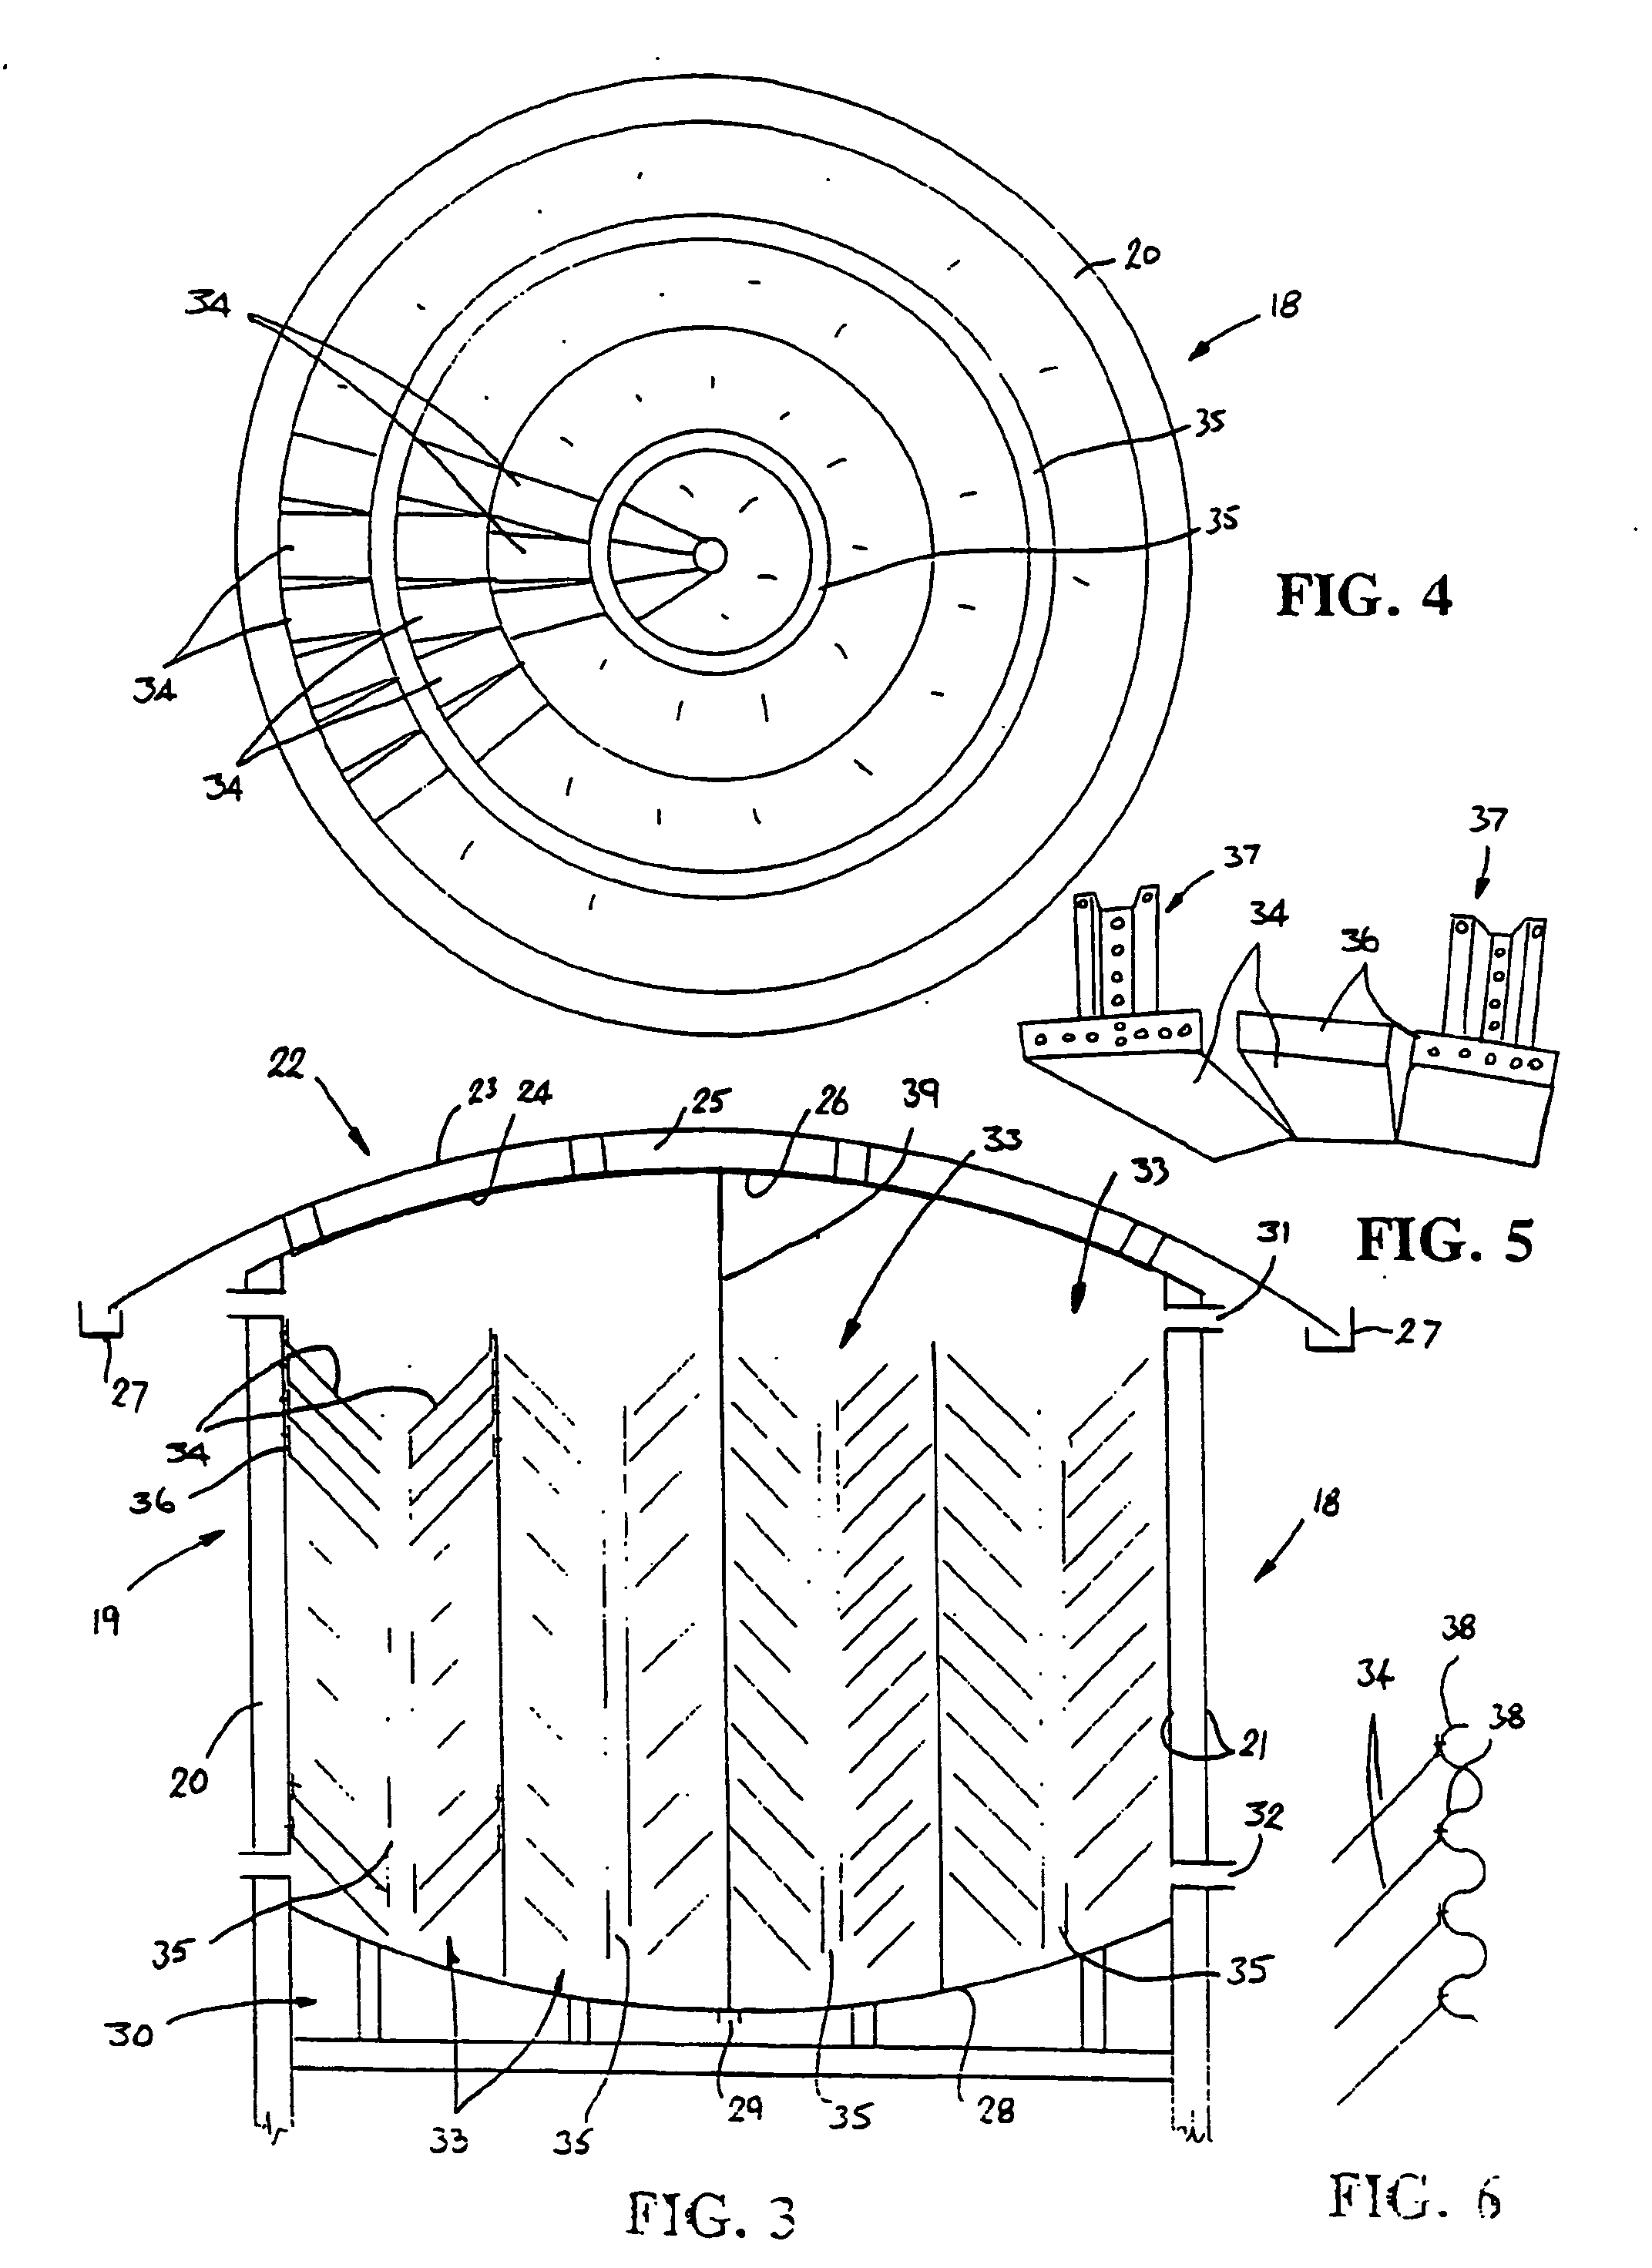 Method and apparatus for collecting atmospheric moisture